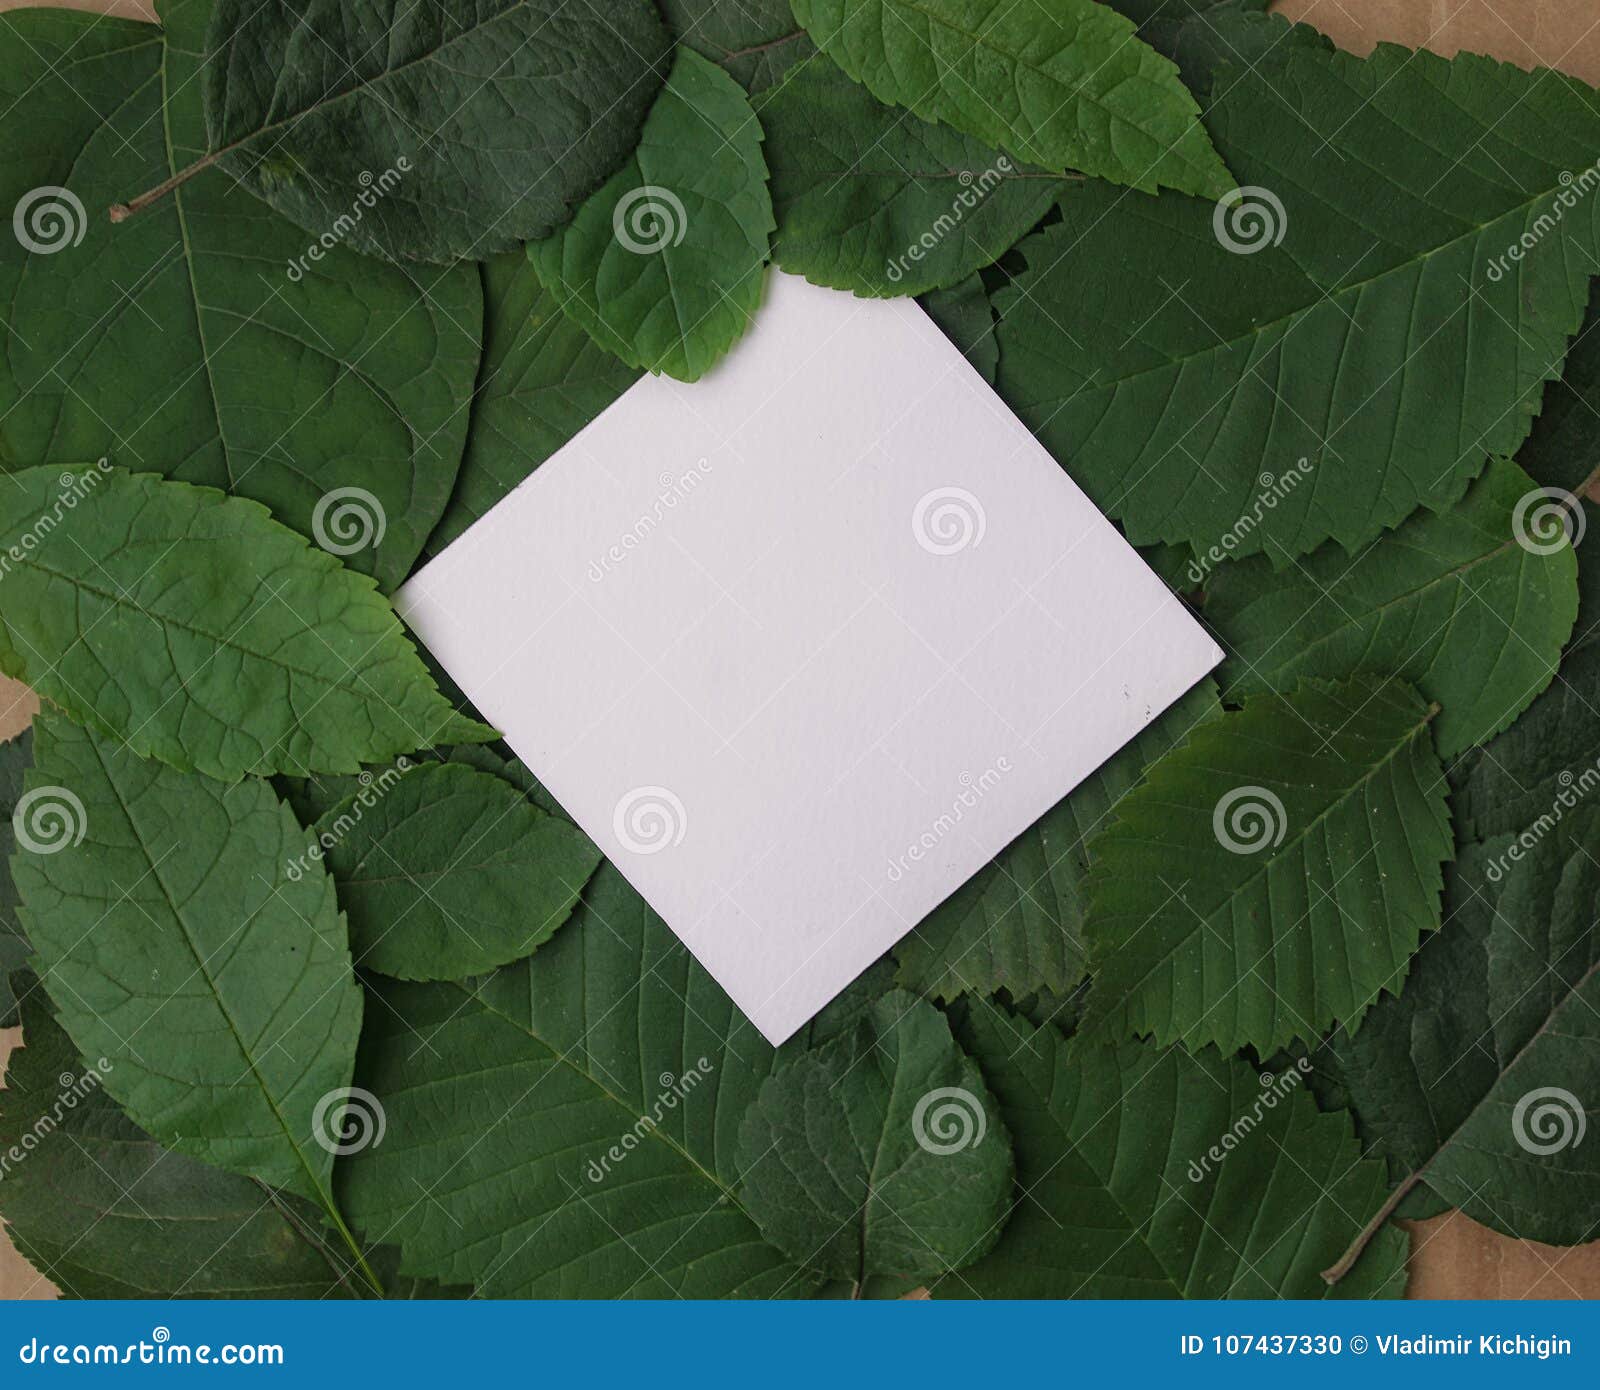 Background of Green Leaves with a Paper Stock Photo - Image of card